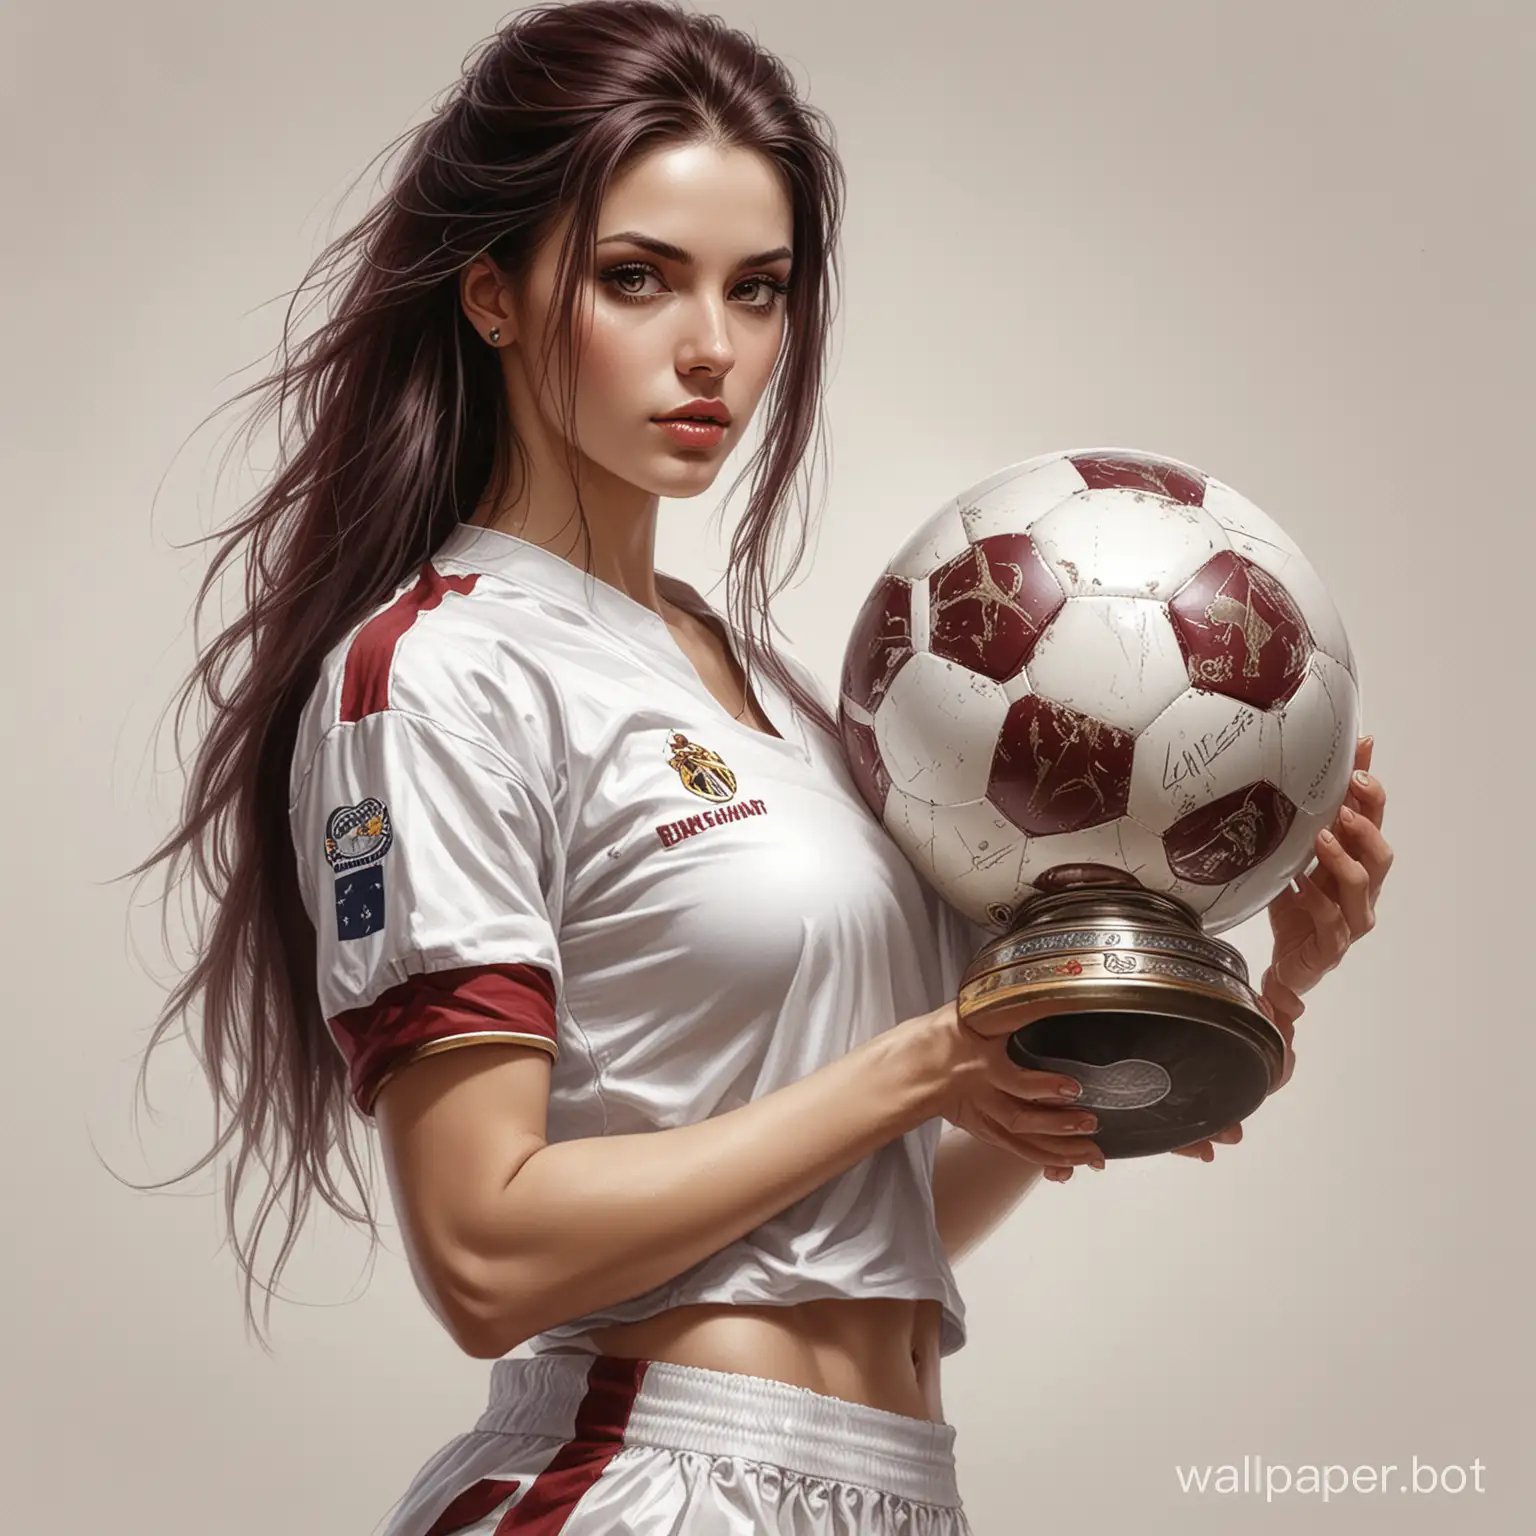 Bosnian-Woman-with-Dark-Hair-in-Burgundy-Soccer-Uniform-Holding-Champions-Cup